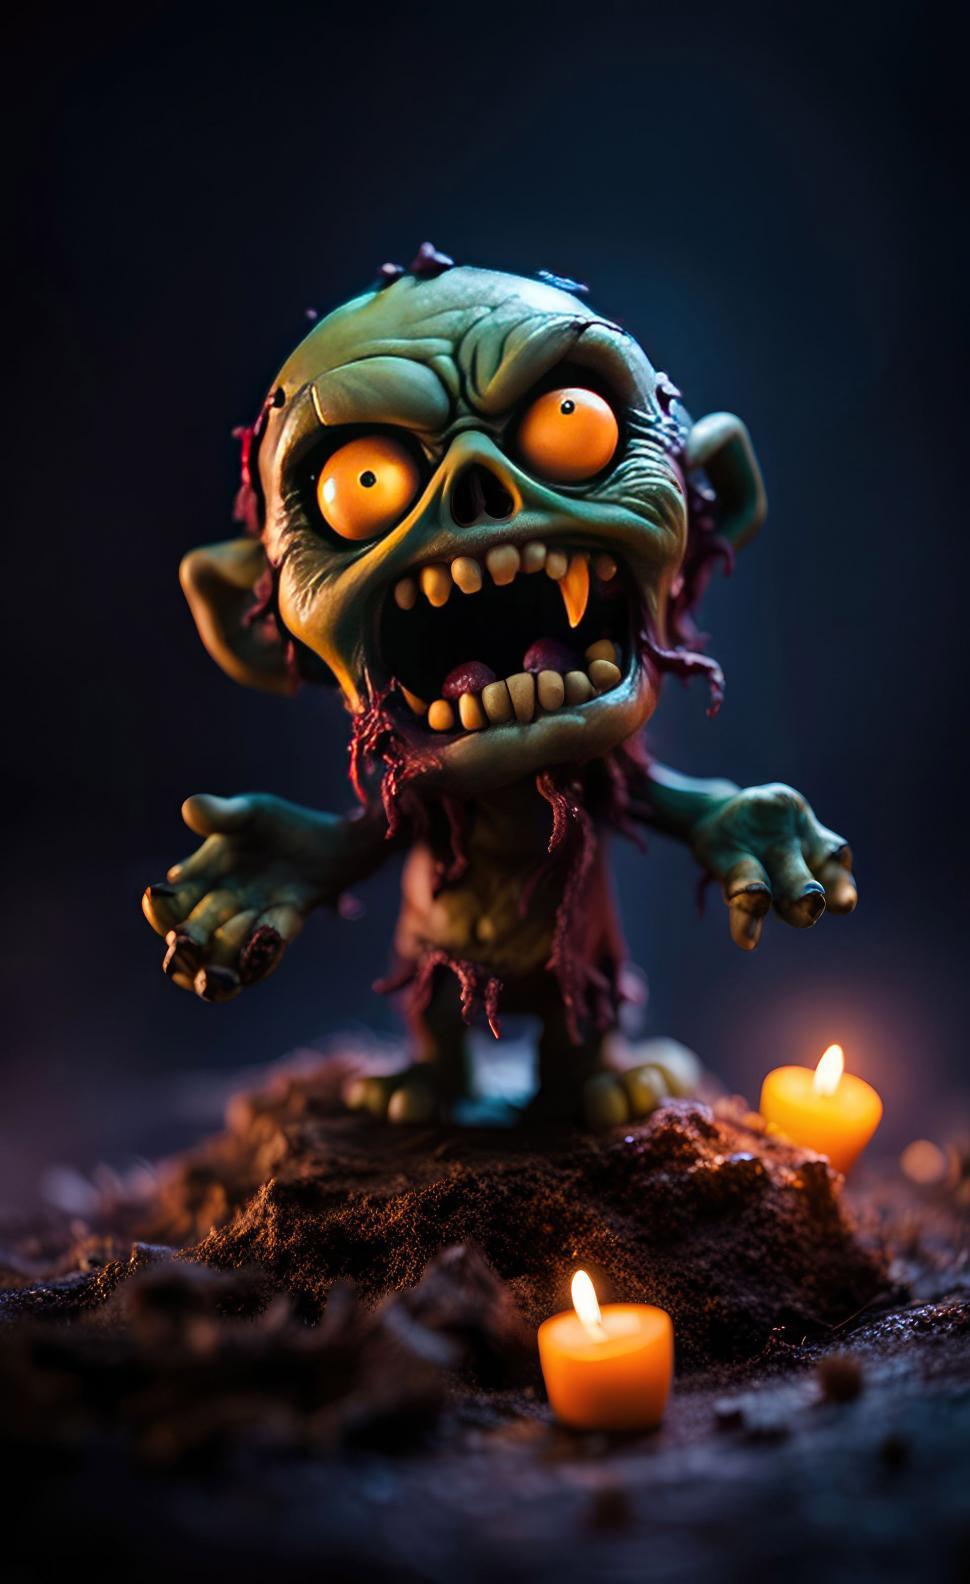 Free Image of Spooky halloween zombie monster with candles 